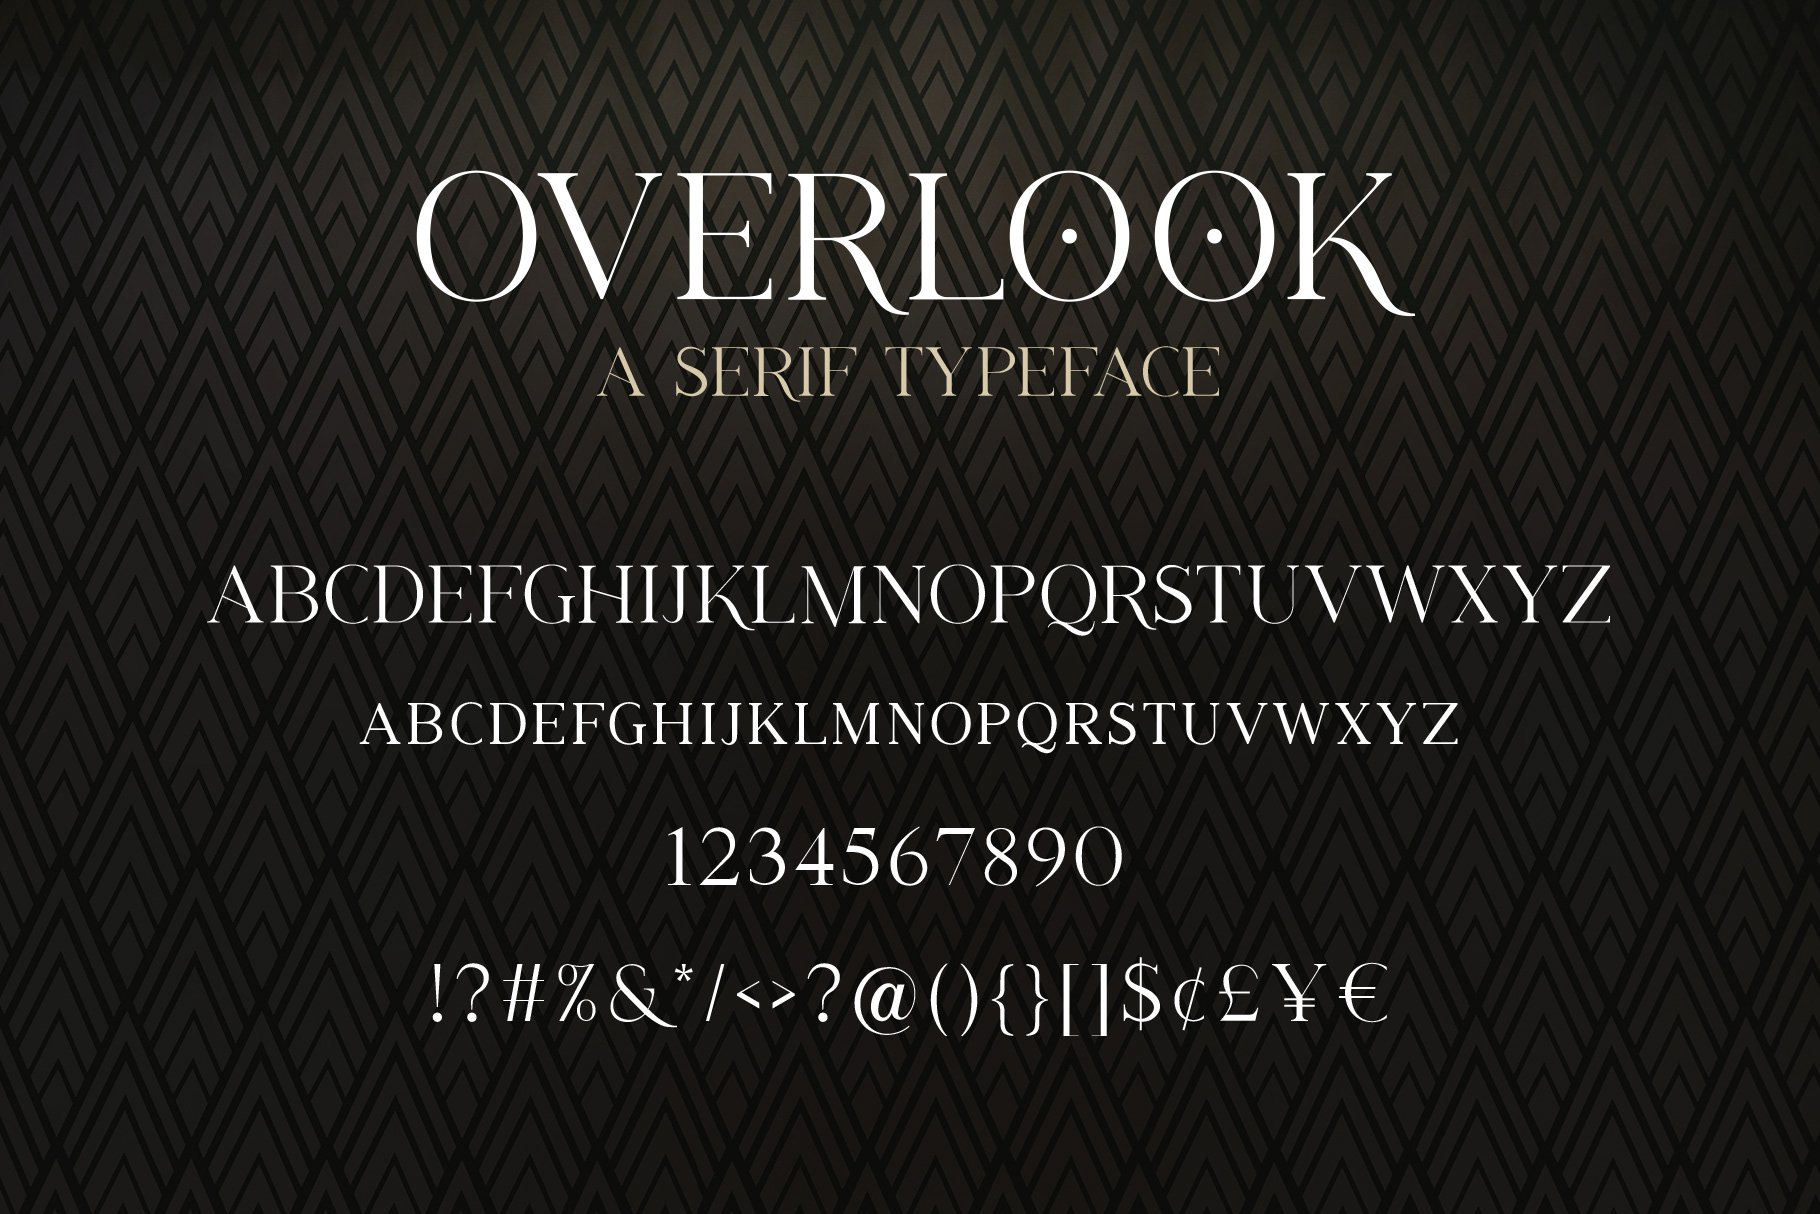 Overlook - A Serif Typeface preview image.